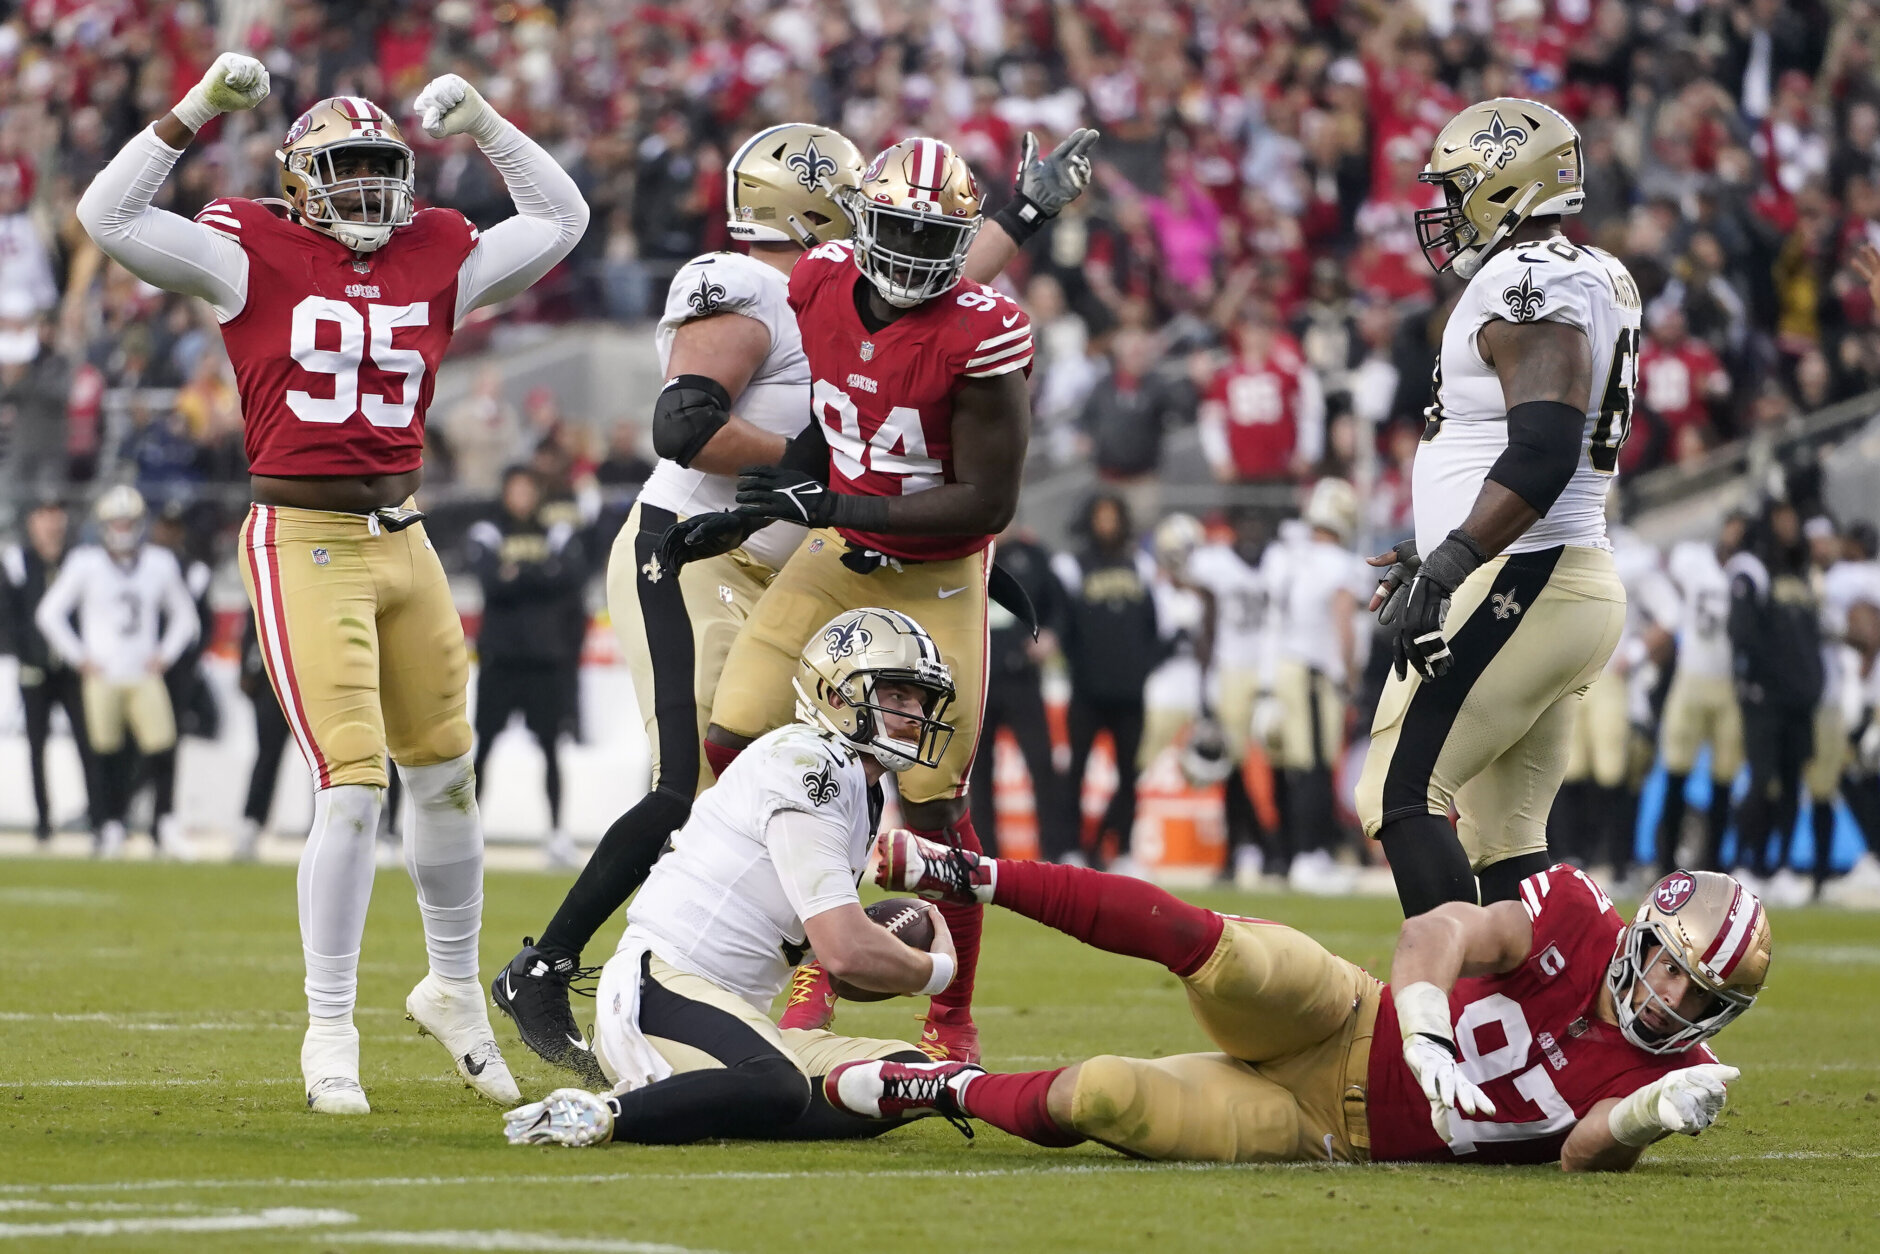 <p><em><strong>Saints 0</strong></em><br />
<em><strong>49ers 13</strong></em></p>
<p>While many focus on San Francisco&#8217;s improved QB play and a run game anchored by Christian McCaffrey, I&#8217;m more enamored by the Niners&#8217; defense.</p>
<p>This shutout (the first against New Orleans since … the Niners blanked the Saints in 2001) was the fourth straight game the 49ers haven&#8217;t given up a single point in the second half, outscoring opponents 57-0 over a span in which they&#8217;re allowing only 10 points per game. San Fran has won a league-best six games by double digits. In a wide-open NFC, this is my new Super Bowl favorite.</p>
